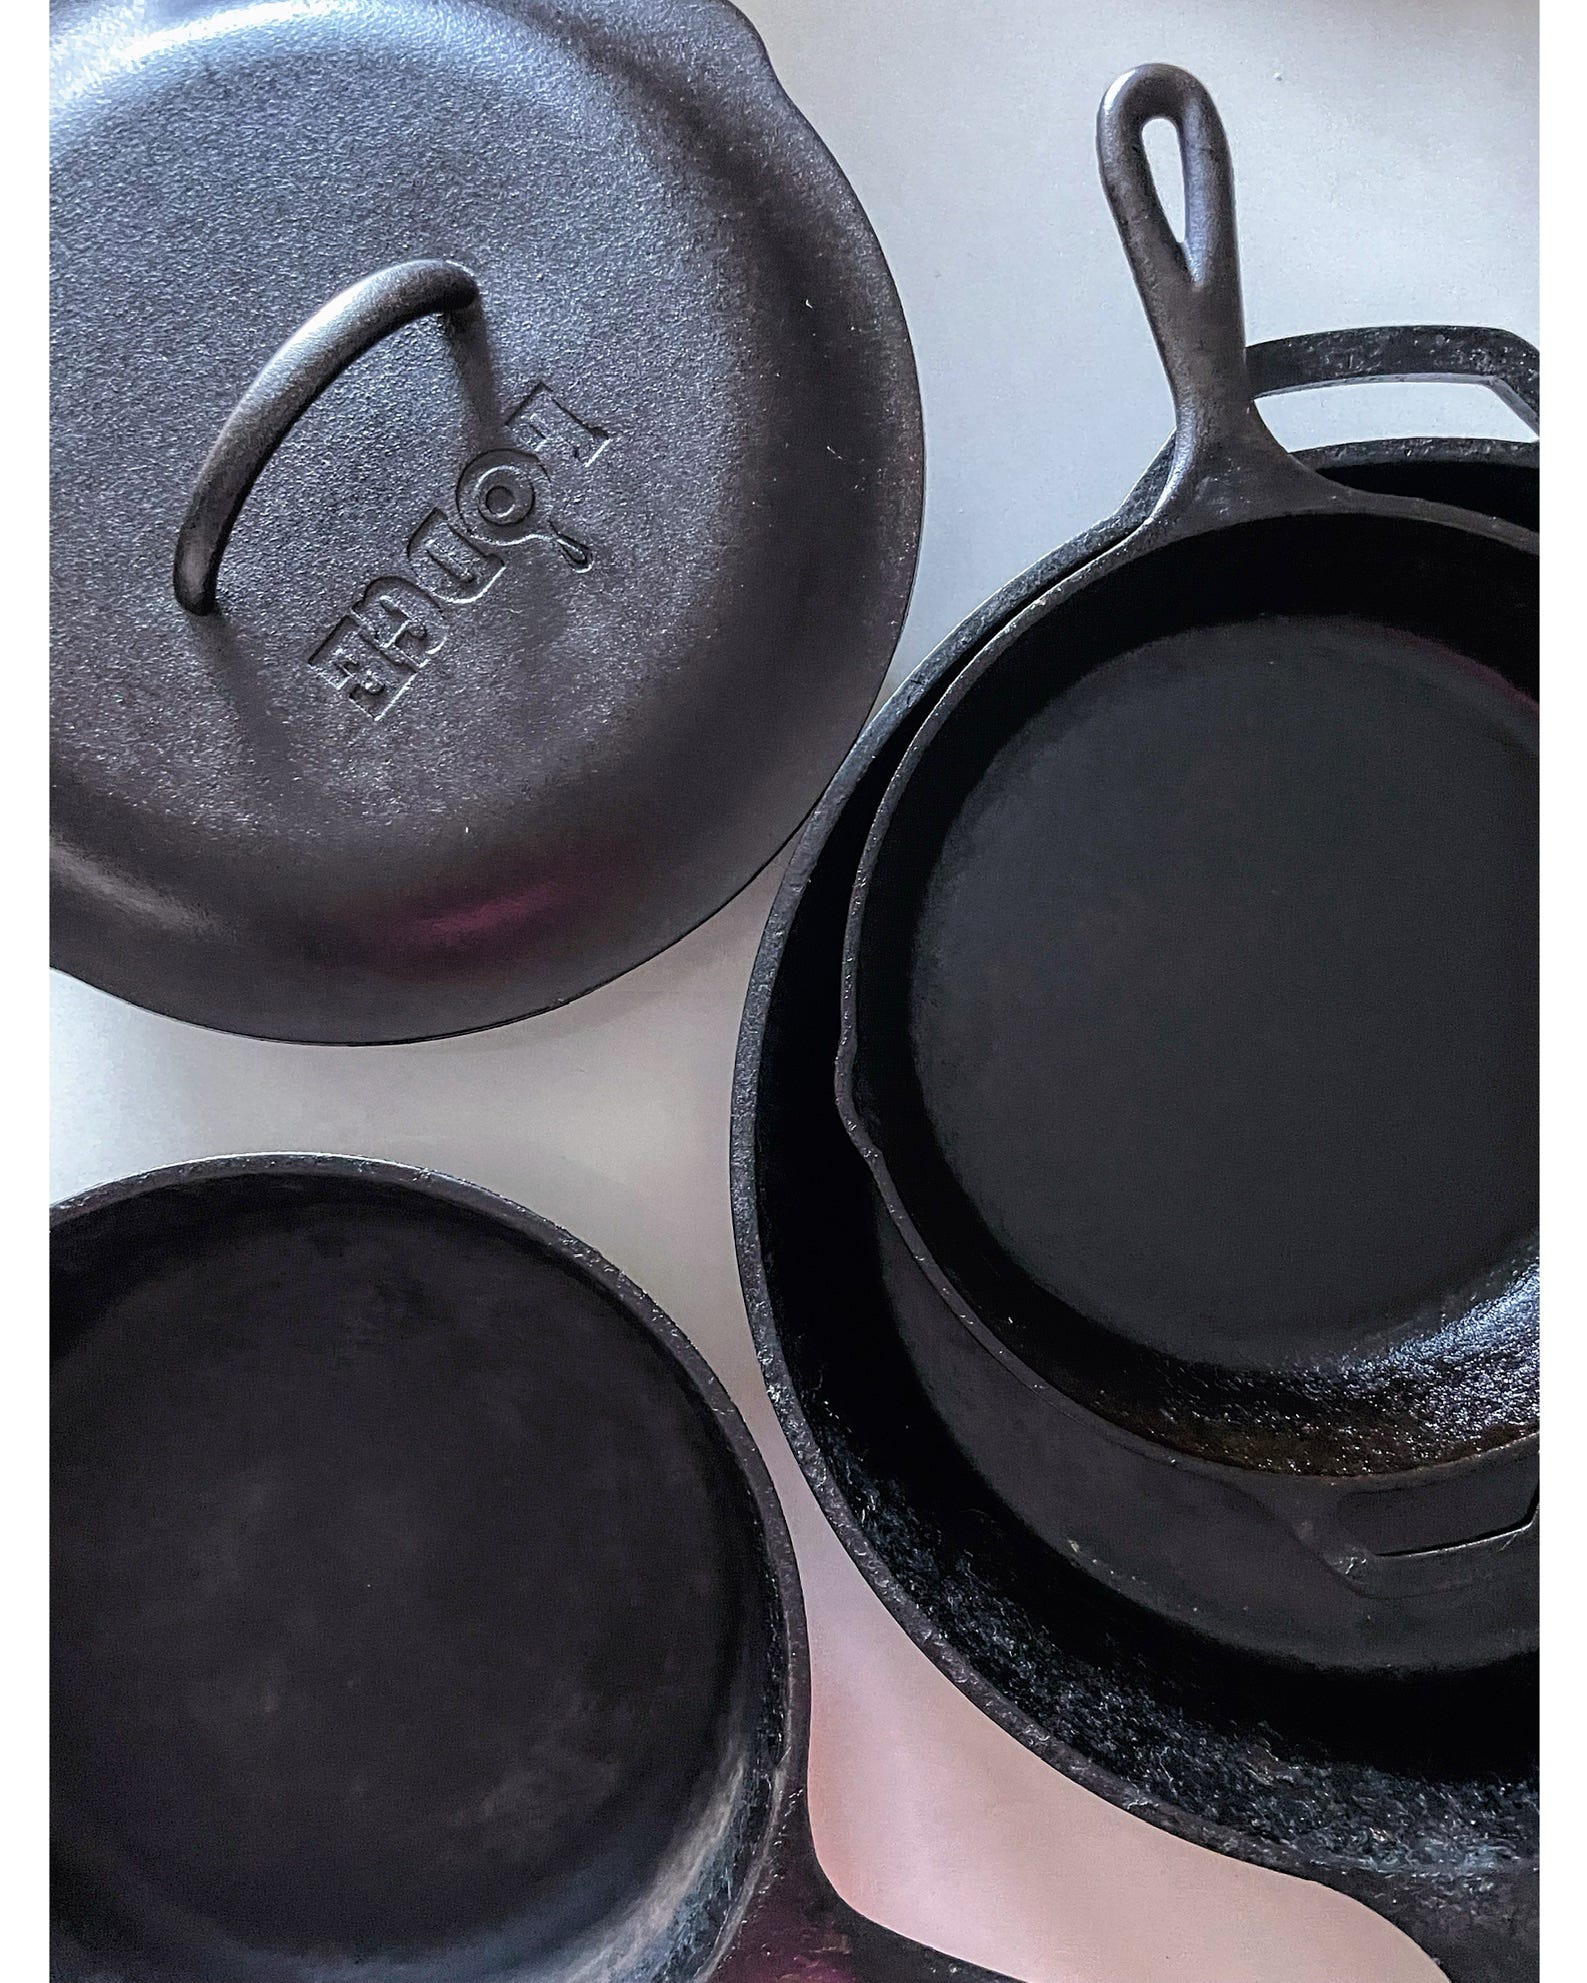 How to Season Cast Iron with Ghee - Pure Indian Foods Blog